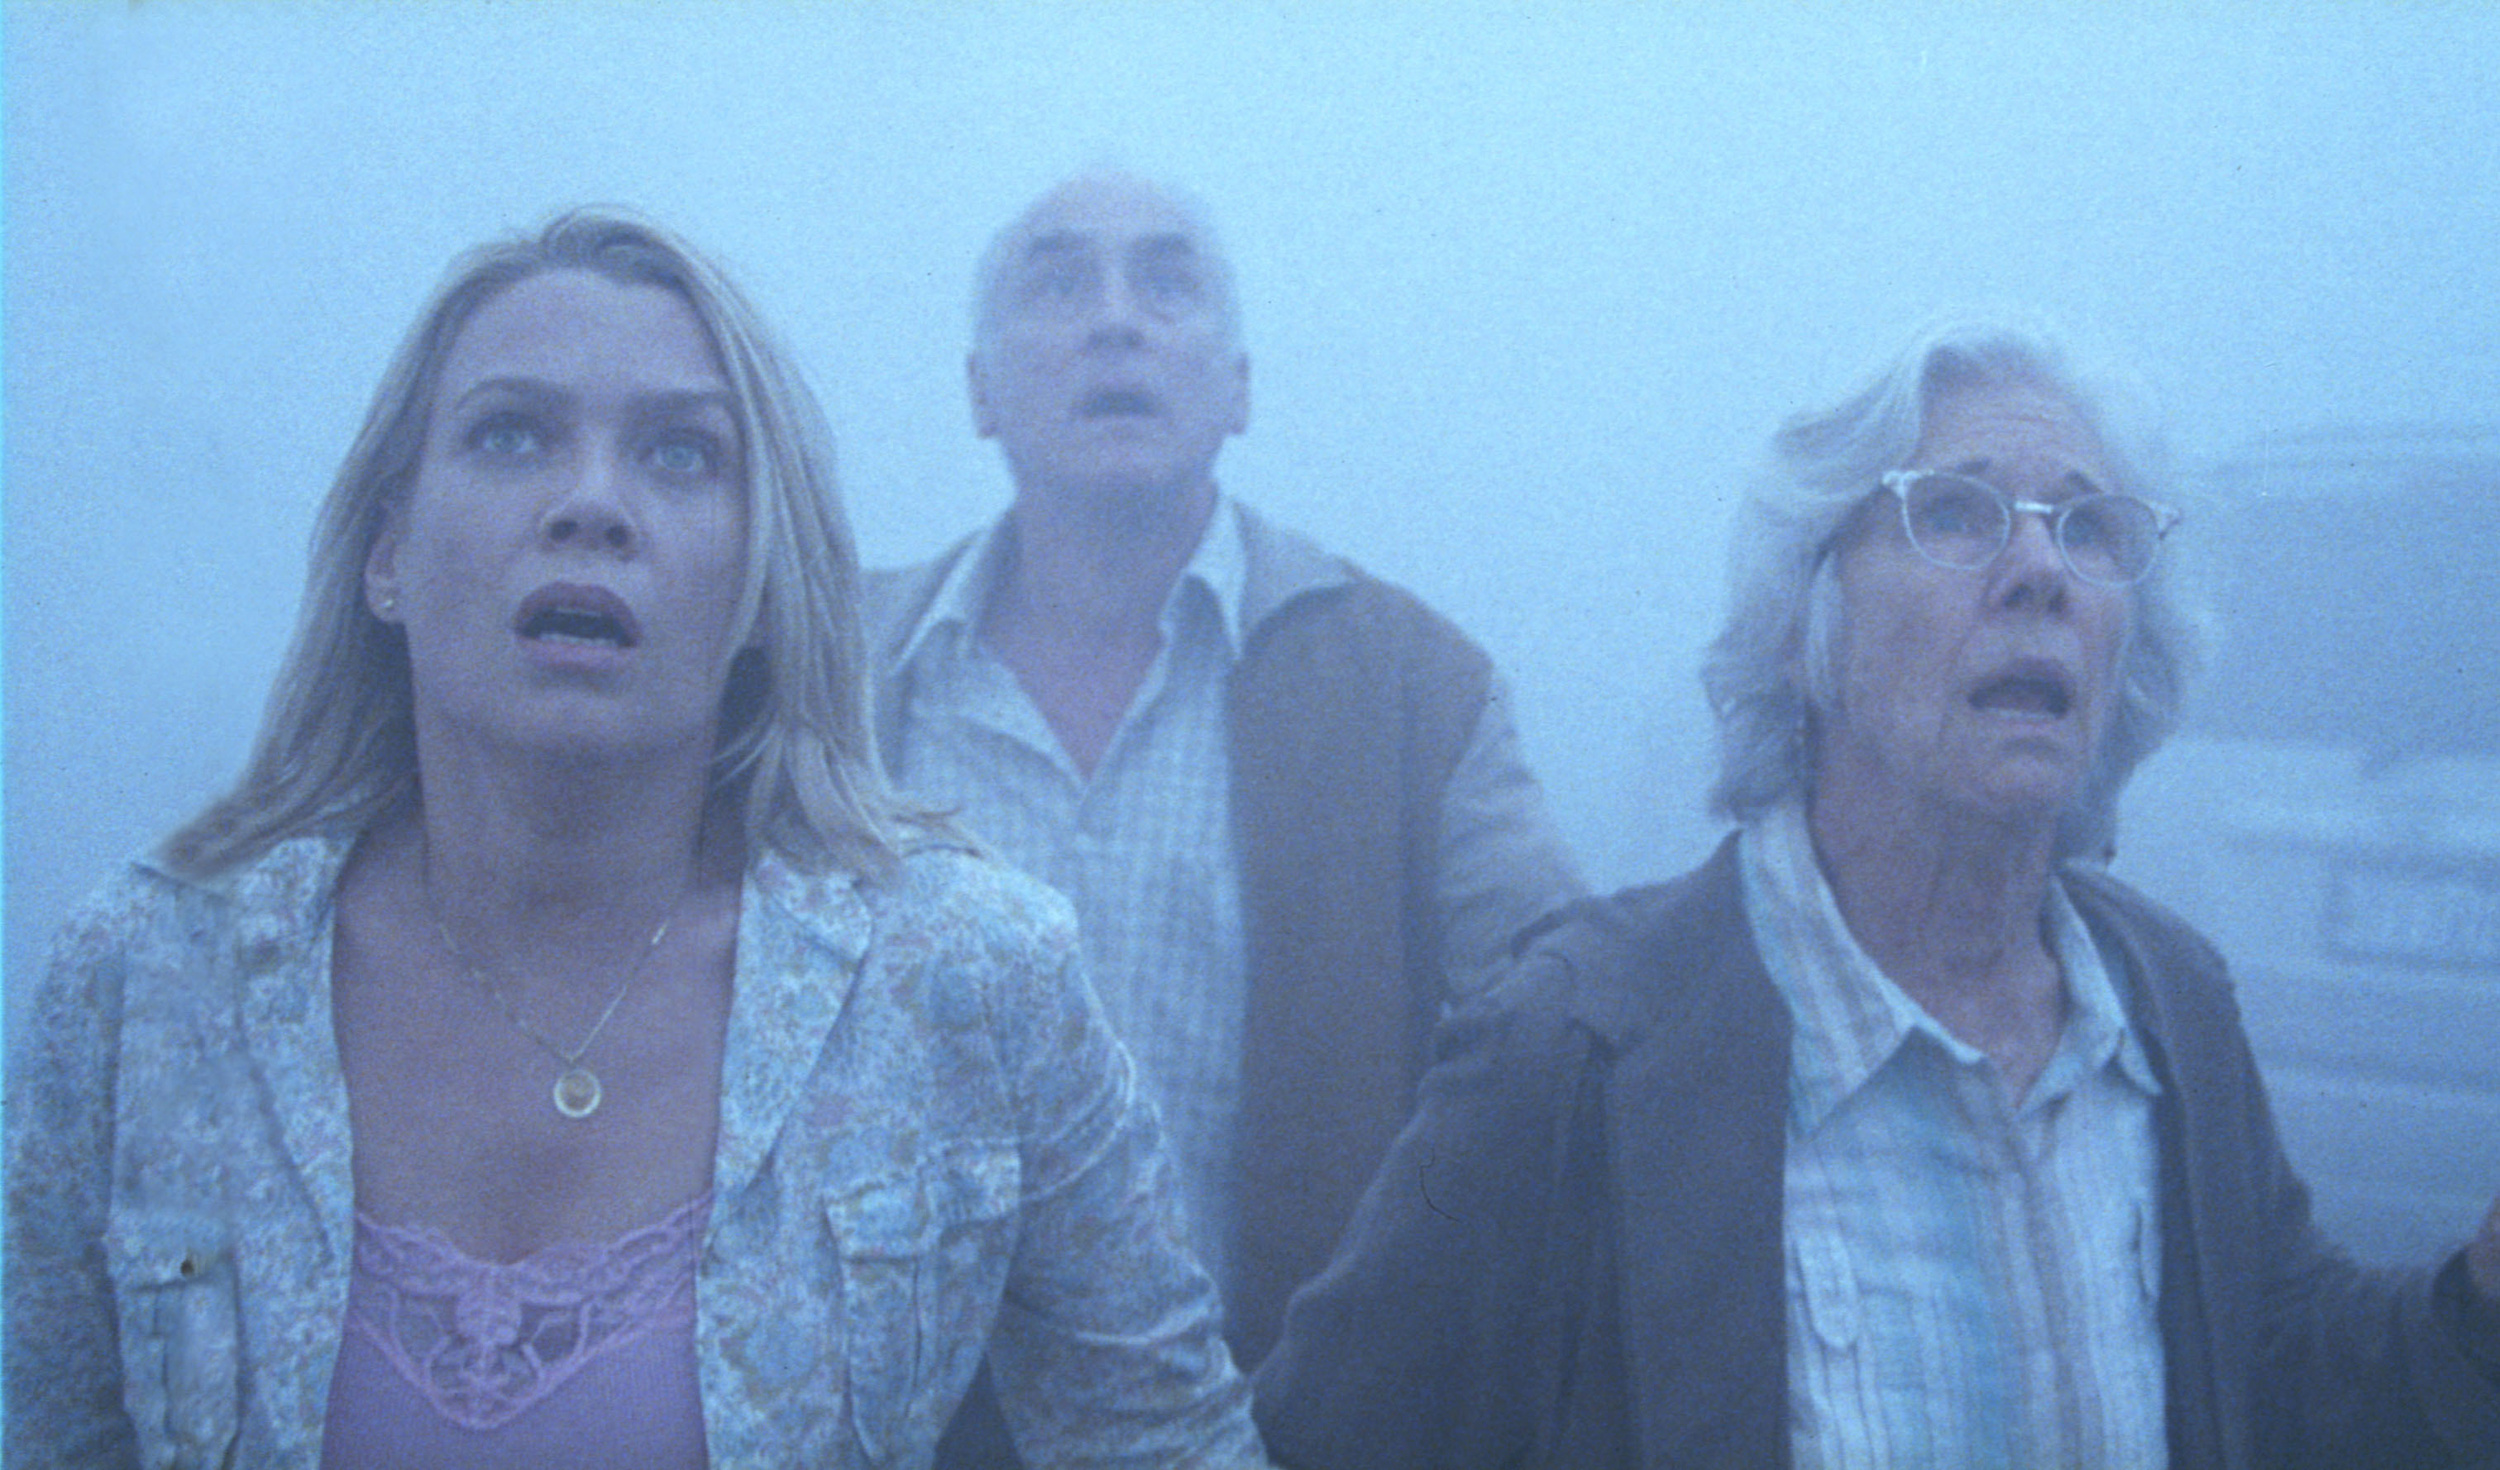 <p>Monster movies are generally entertaining, extremely violent spectacles that audiences can enjoy on a big screen. And<em> The Mist</em> is no exception. When the mist brings in a bunch of monsters, audiences can watch from their seats with eager eyes.</p><p>You may also like: <a href='https://www.yardbarker.com/entertainment/articles/the_25_greatest_opening_lines_to_songs_031224/s1__39107121'>The 25 greatest opening lines to songs</a></p>